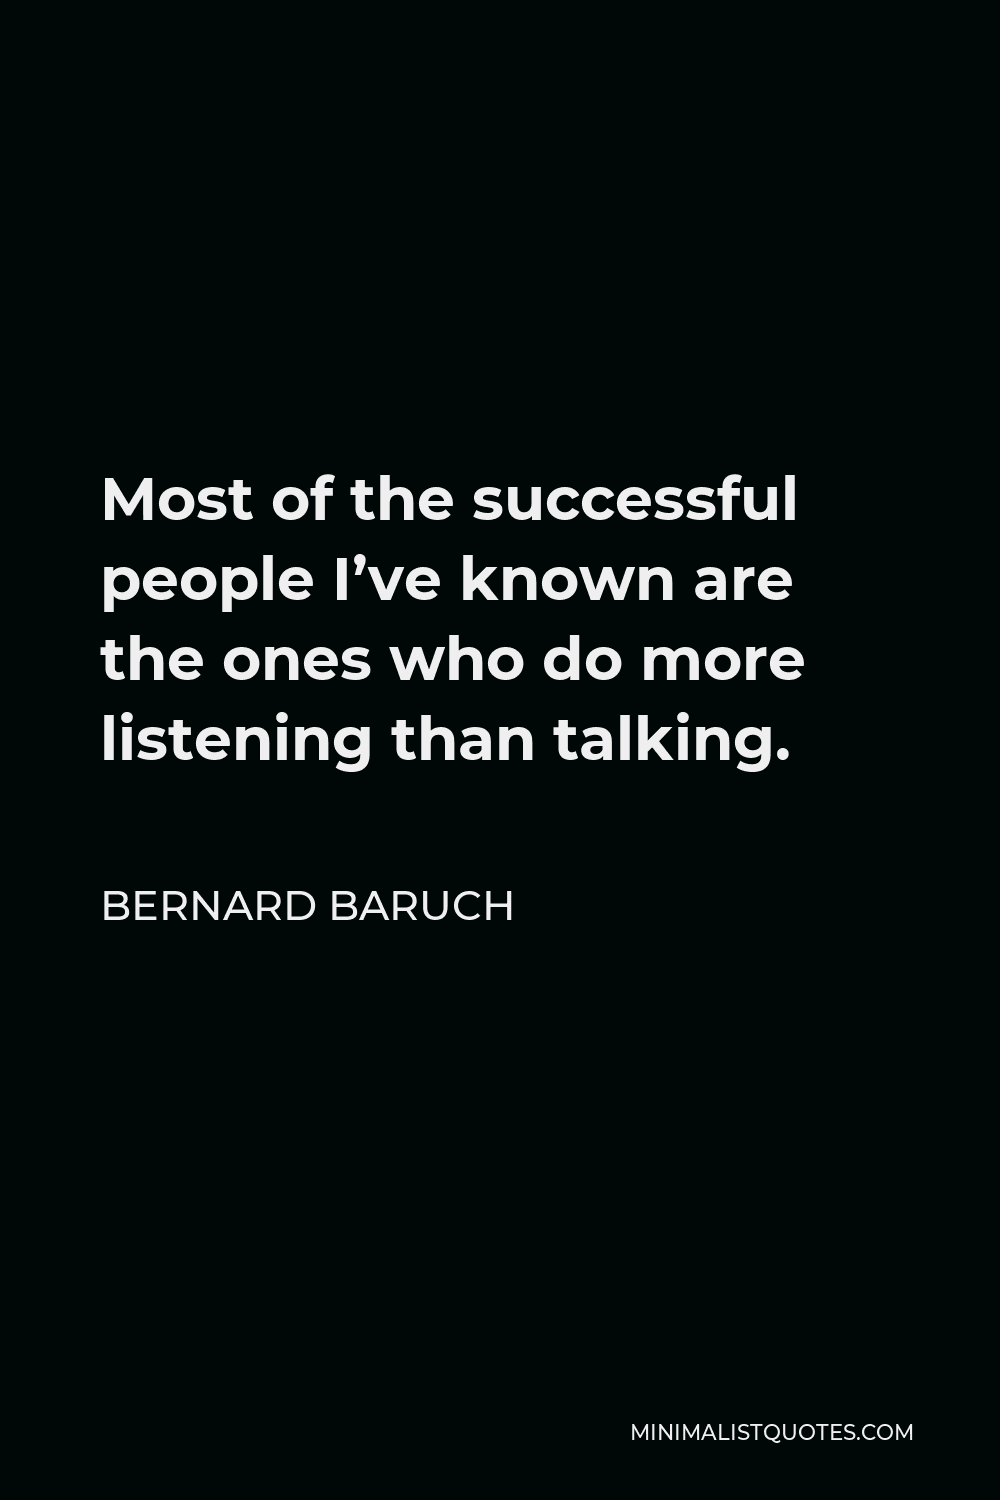 Bernard Baruch Quote - Most of the successful people I’ve known are the ones who do more listening than talking.